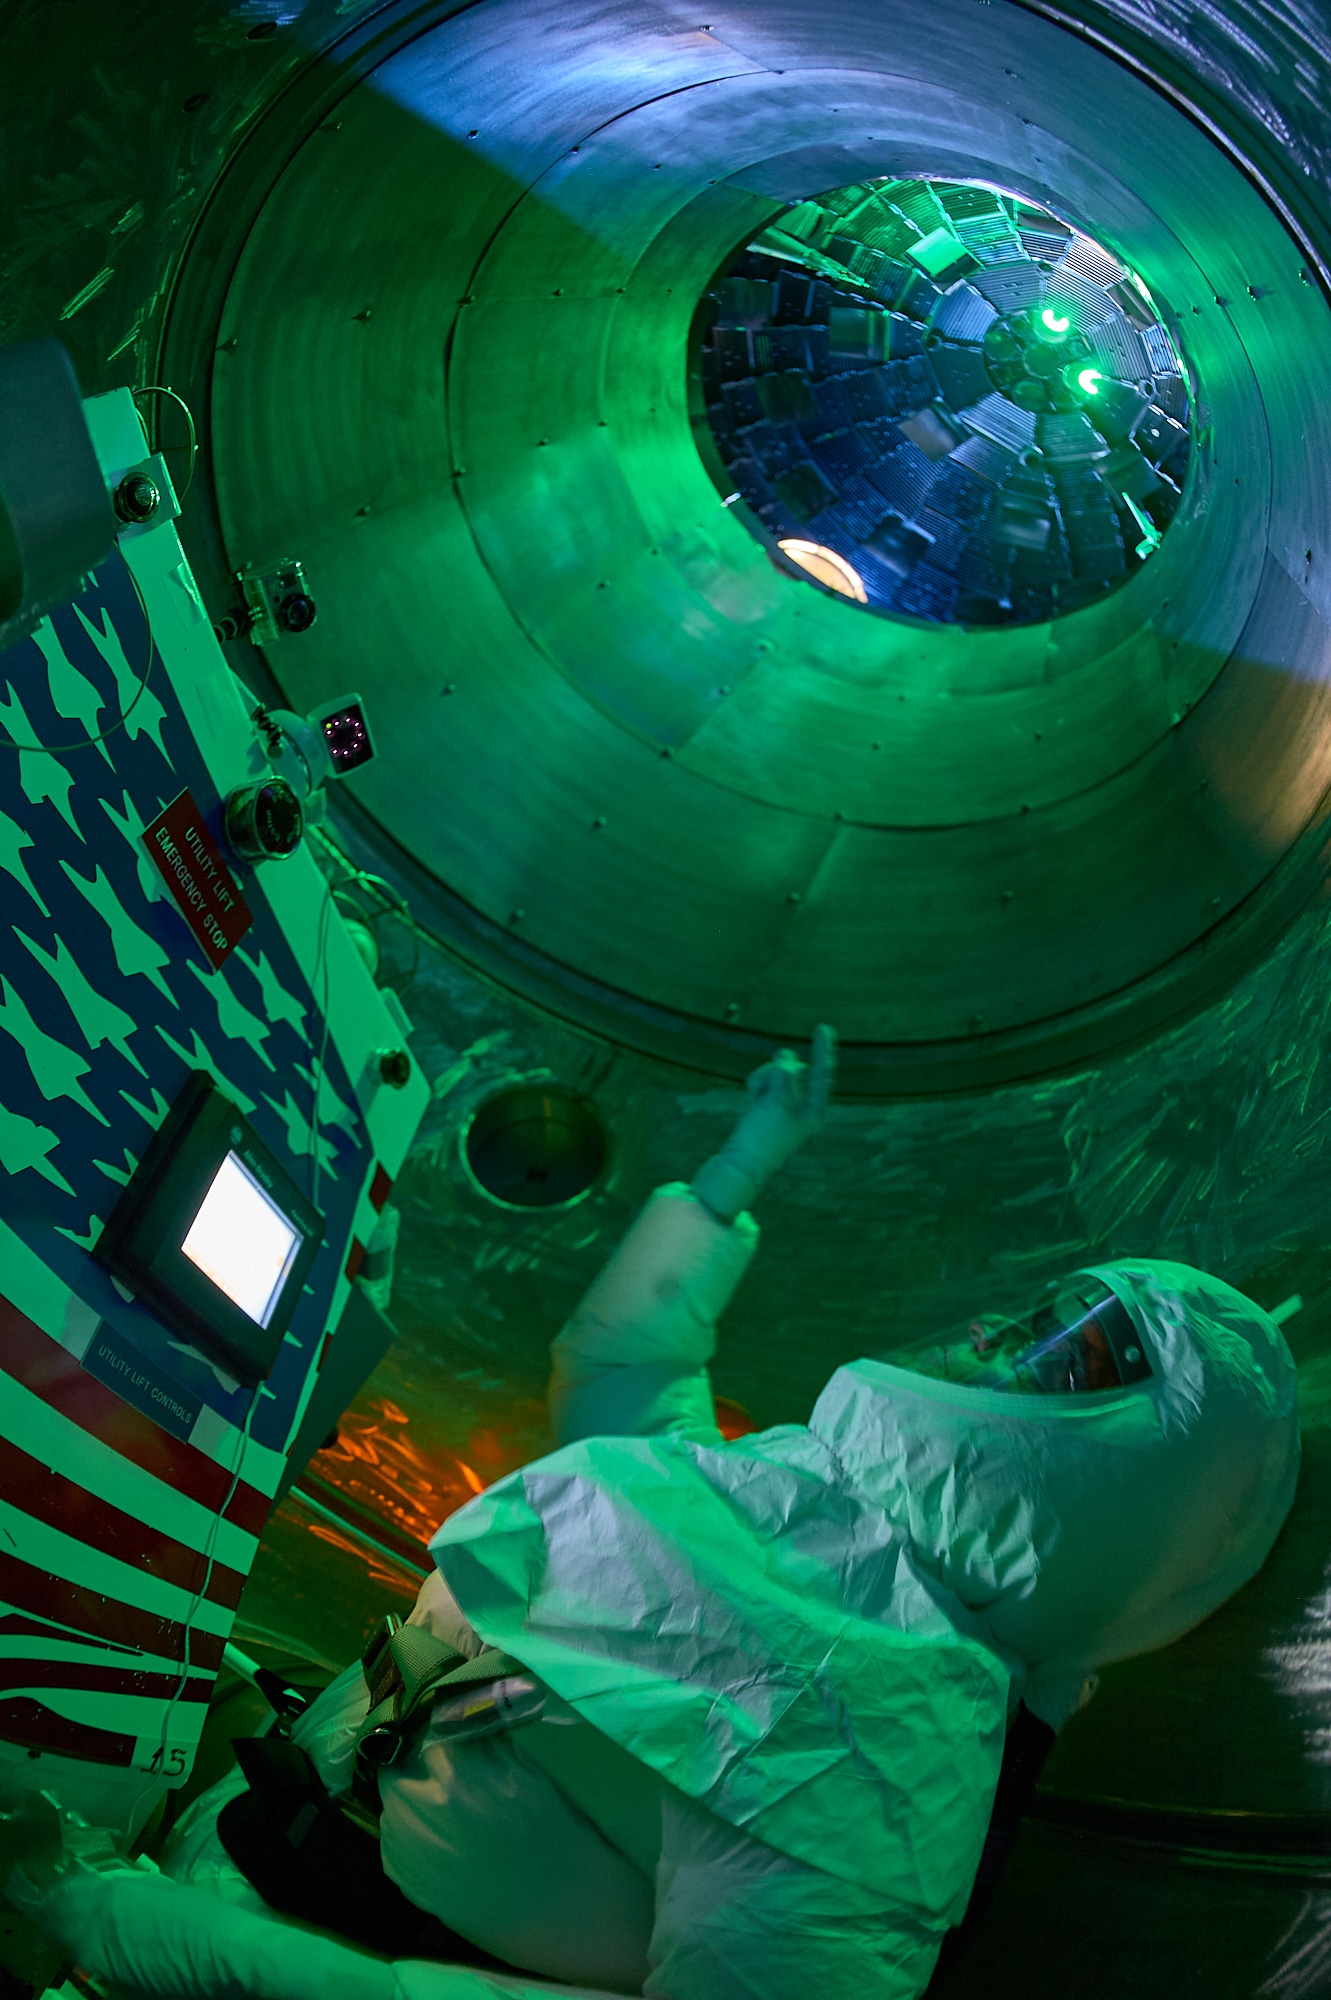 John R. Bower looks up from the TCSS (Target Chamber Service System) as it makes its way inside of the target chamber at NIF.
